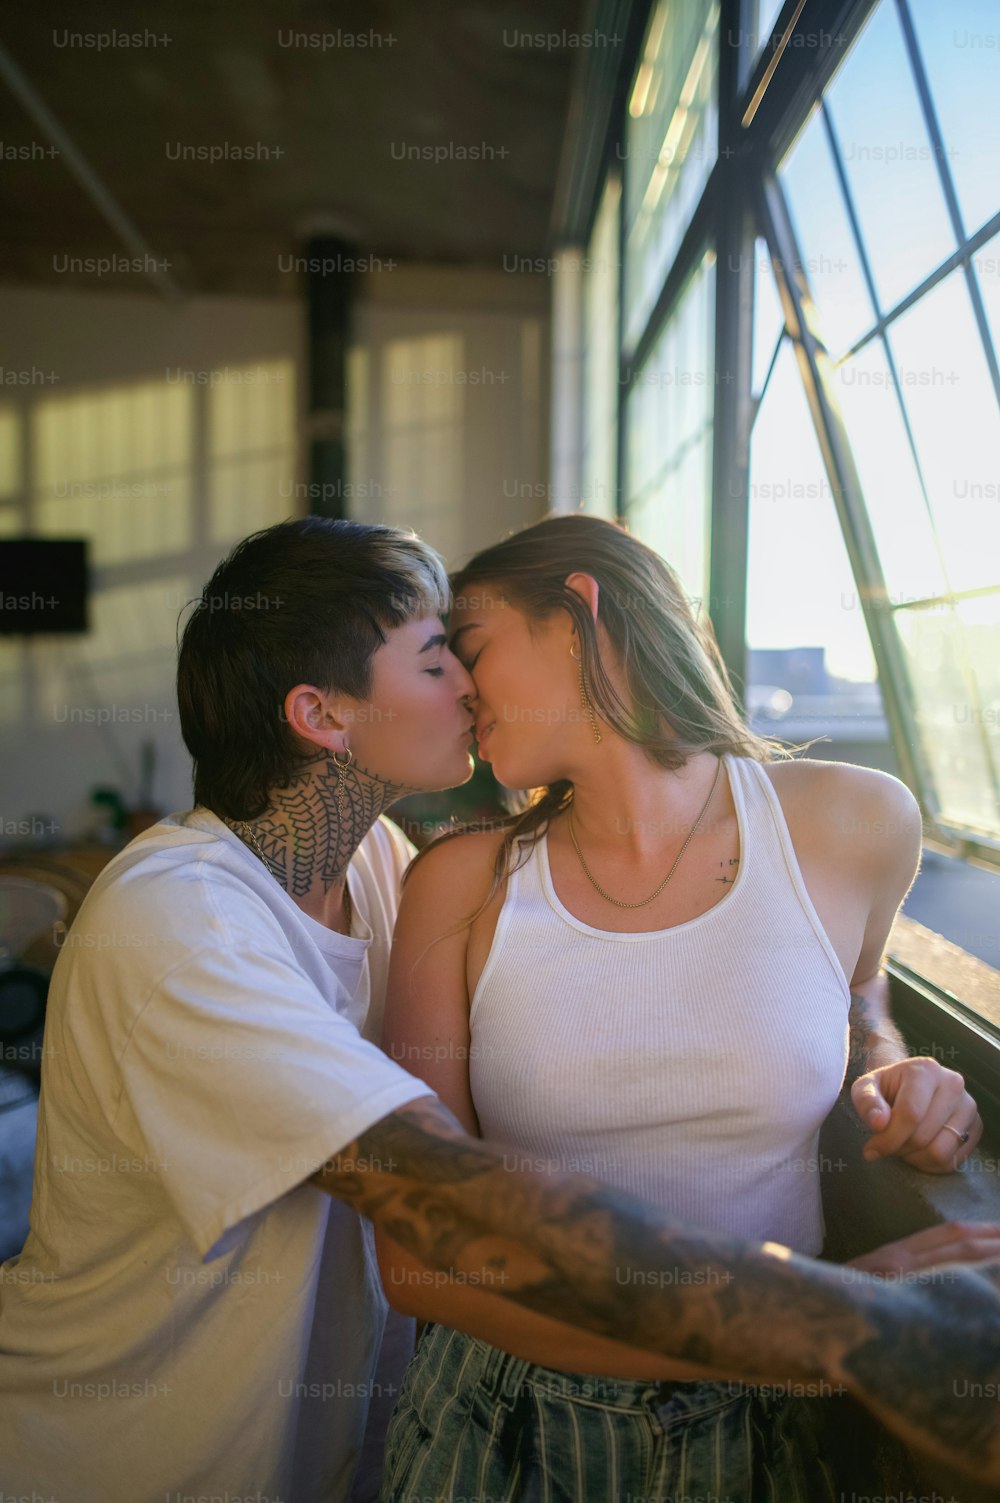 a man and woman kissing each other in front of a window